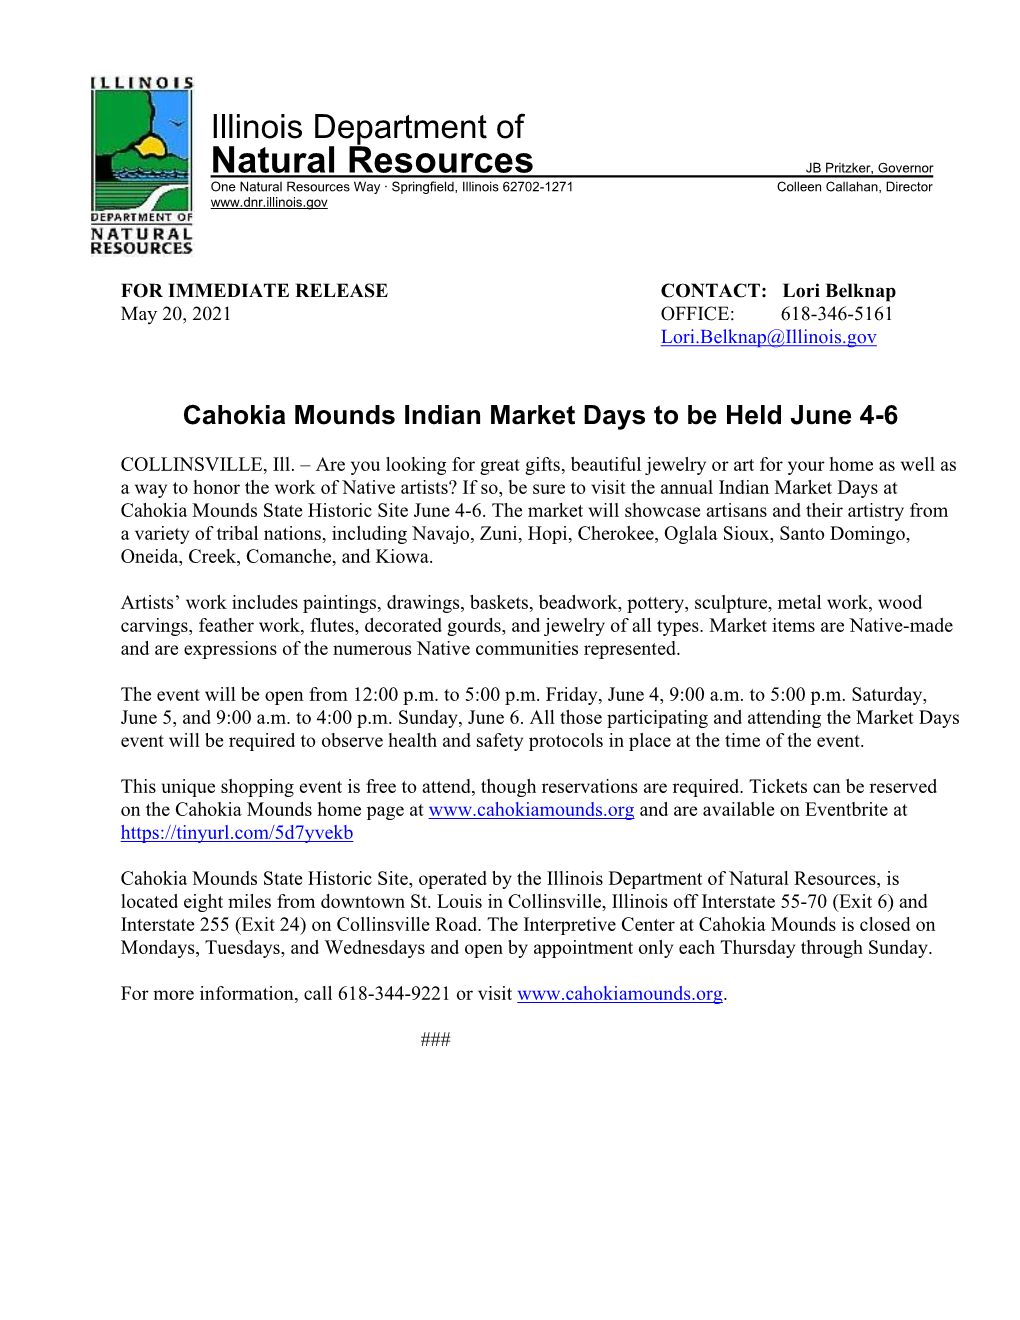 Cahokia Mounds Indian Market Days to Be Held June 4-6